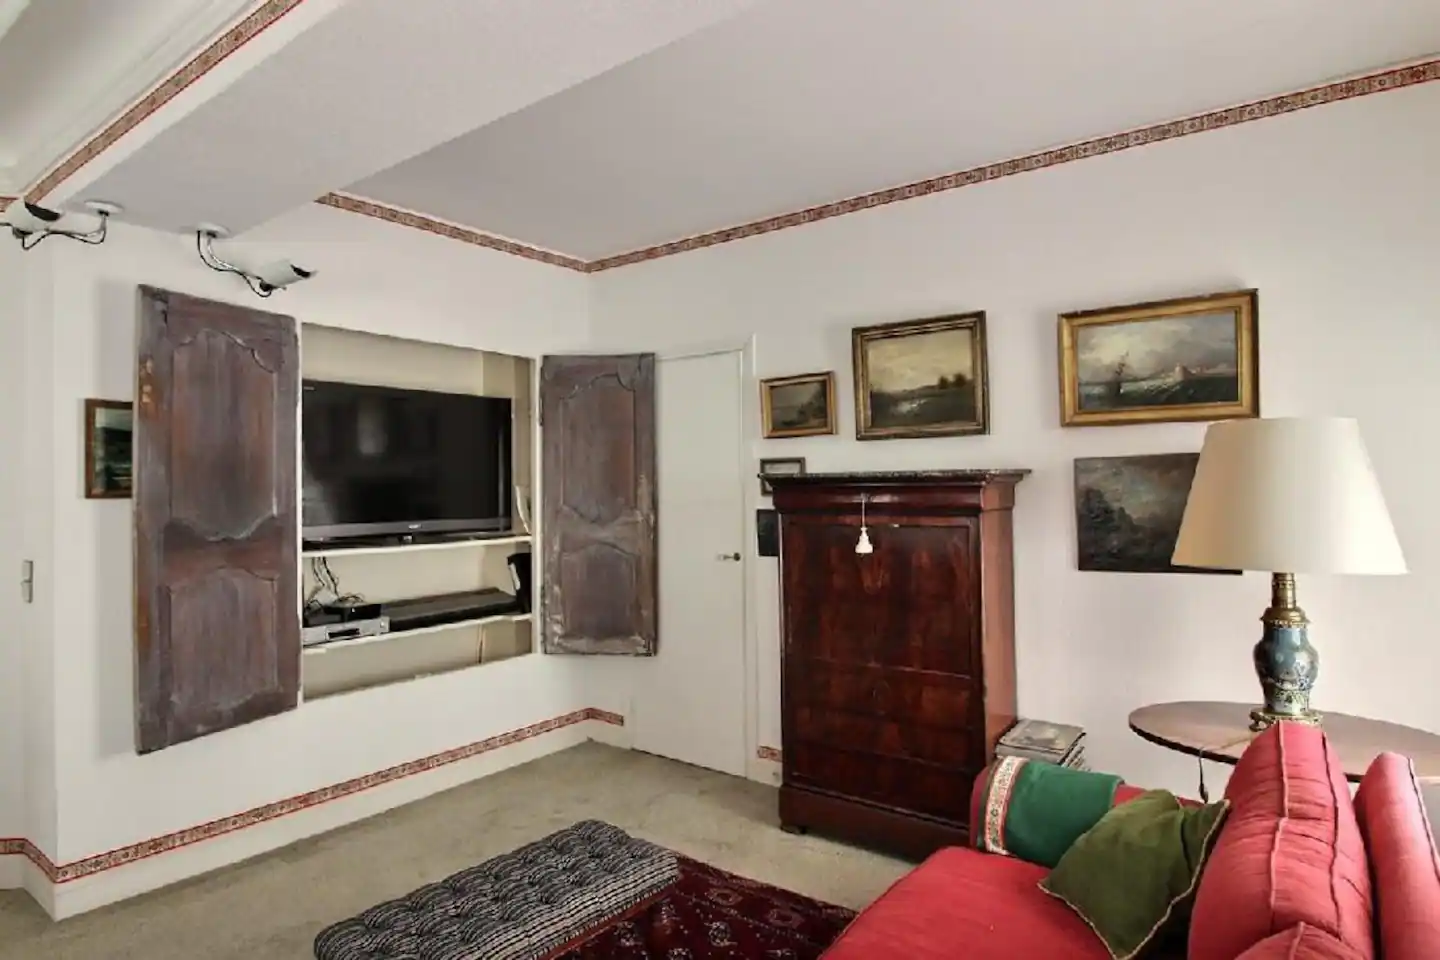 Television room, with a couch and a large TV set placed in a built-in cupboard